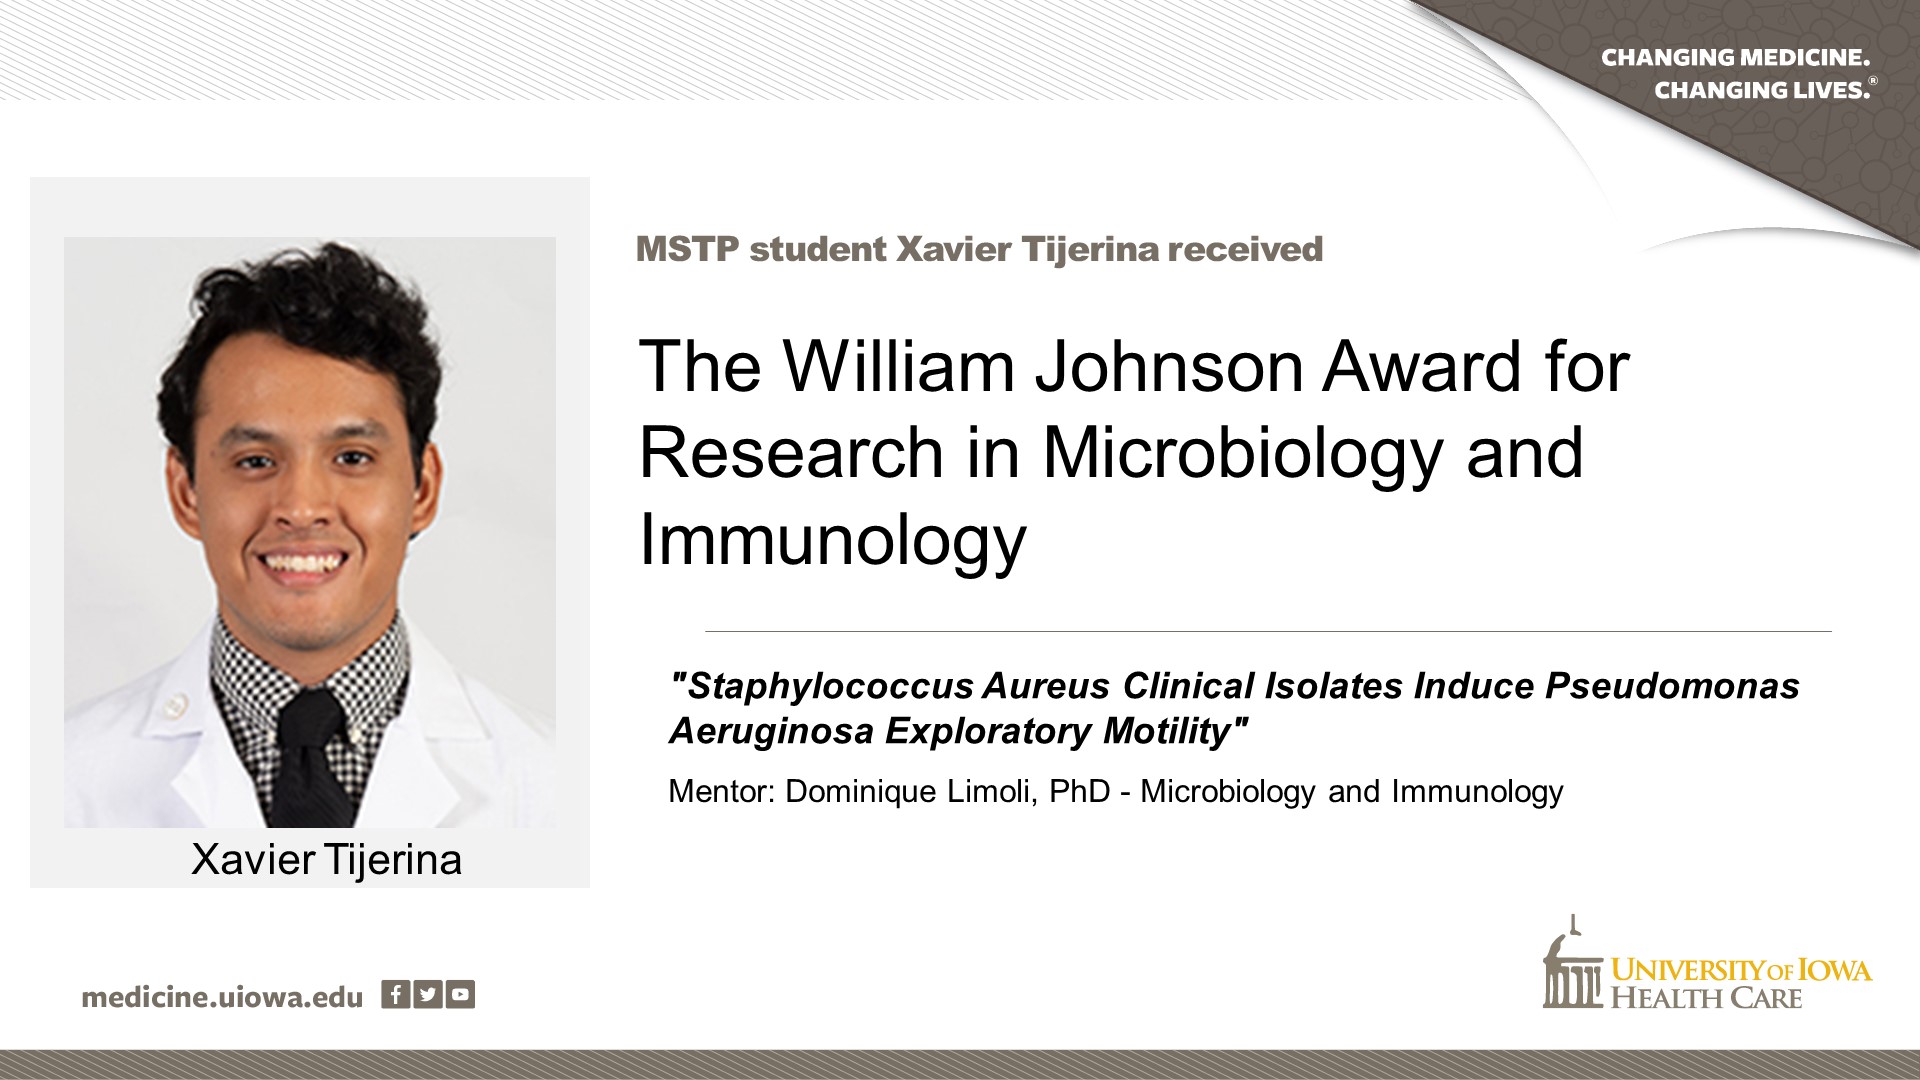 MSTP student Xavier Tijerina receives the William Johnson Award for Research in Microbiology and Immunology